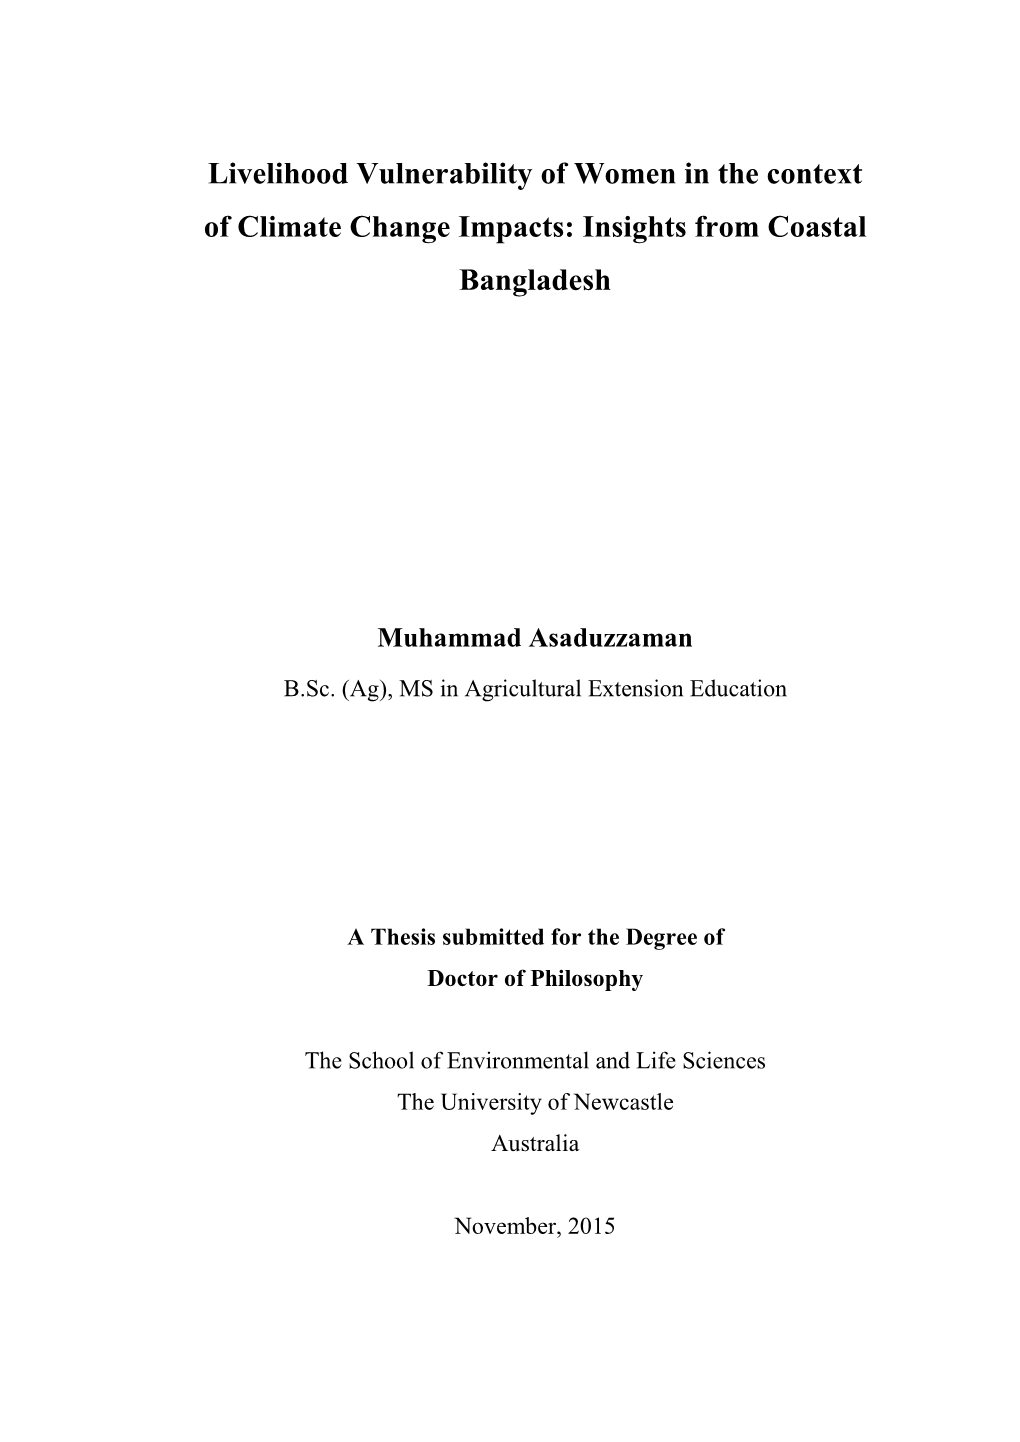 Livelihood Vulnerability of Women in the Context of Climate Change Impacts: Insights from Coastal Bangladesh